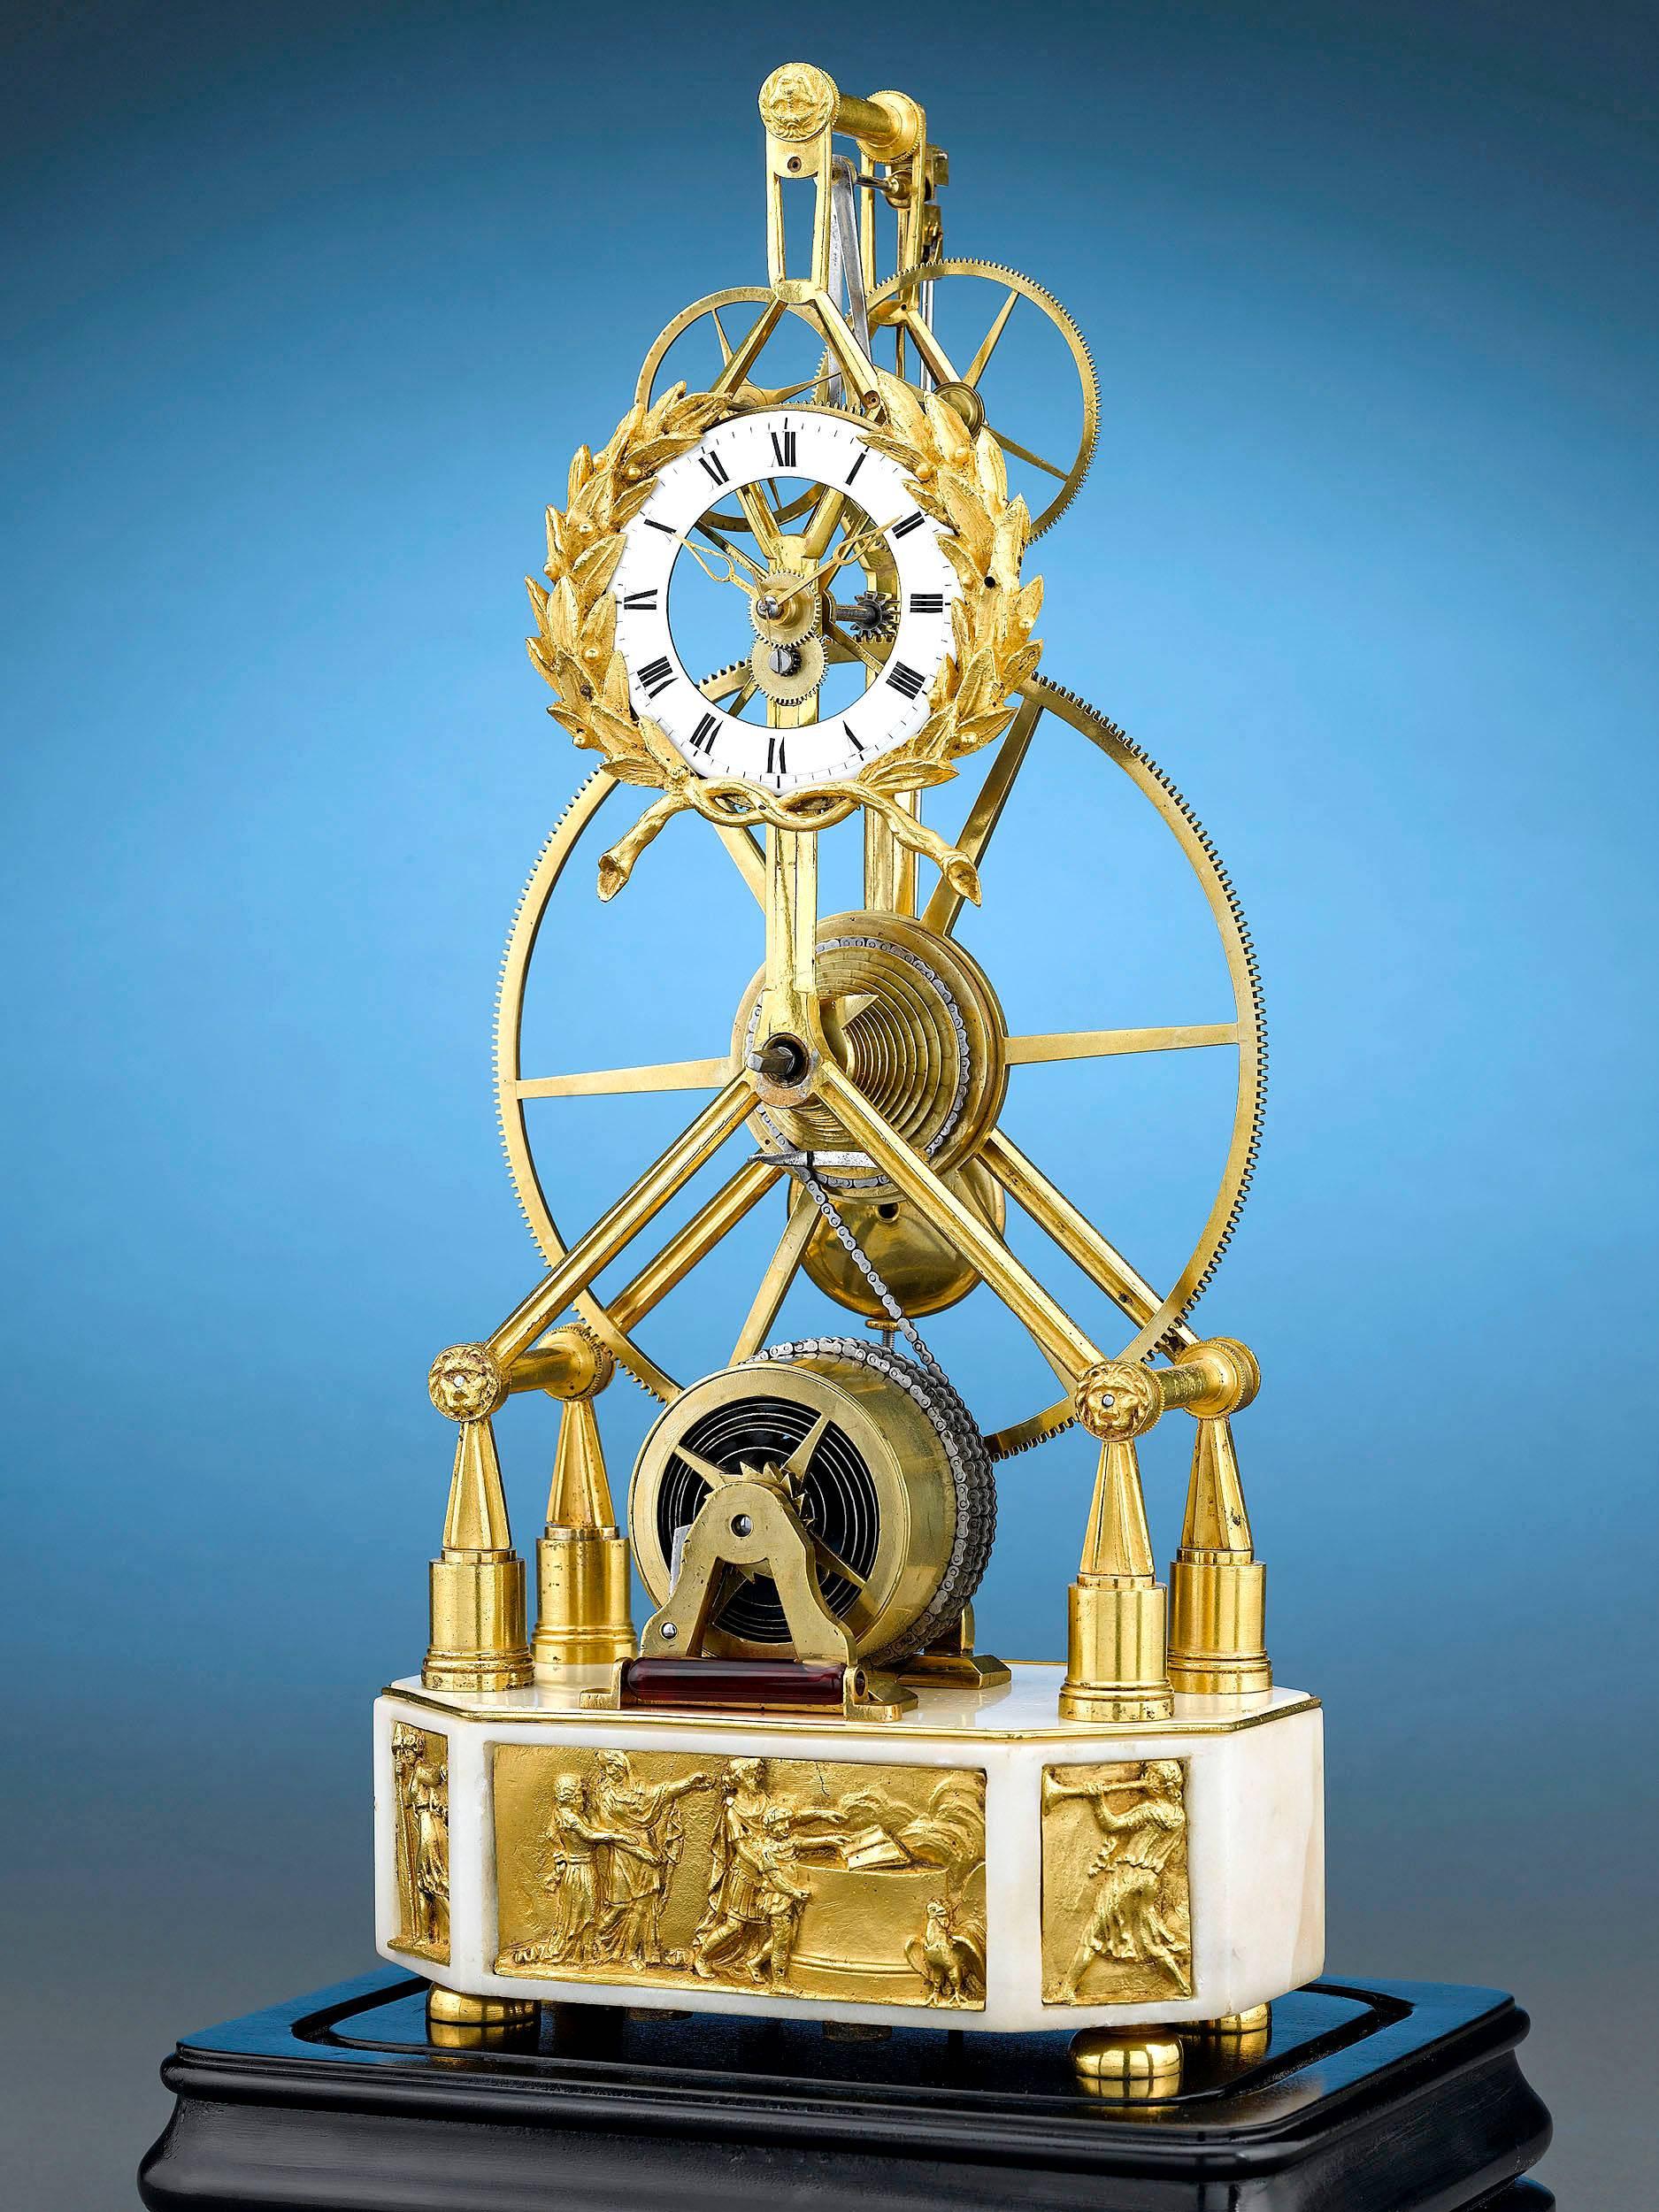 A captivating French great wheel skeleton clock in the Empire style. This clock features a large or 